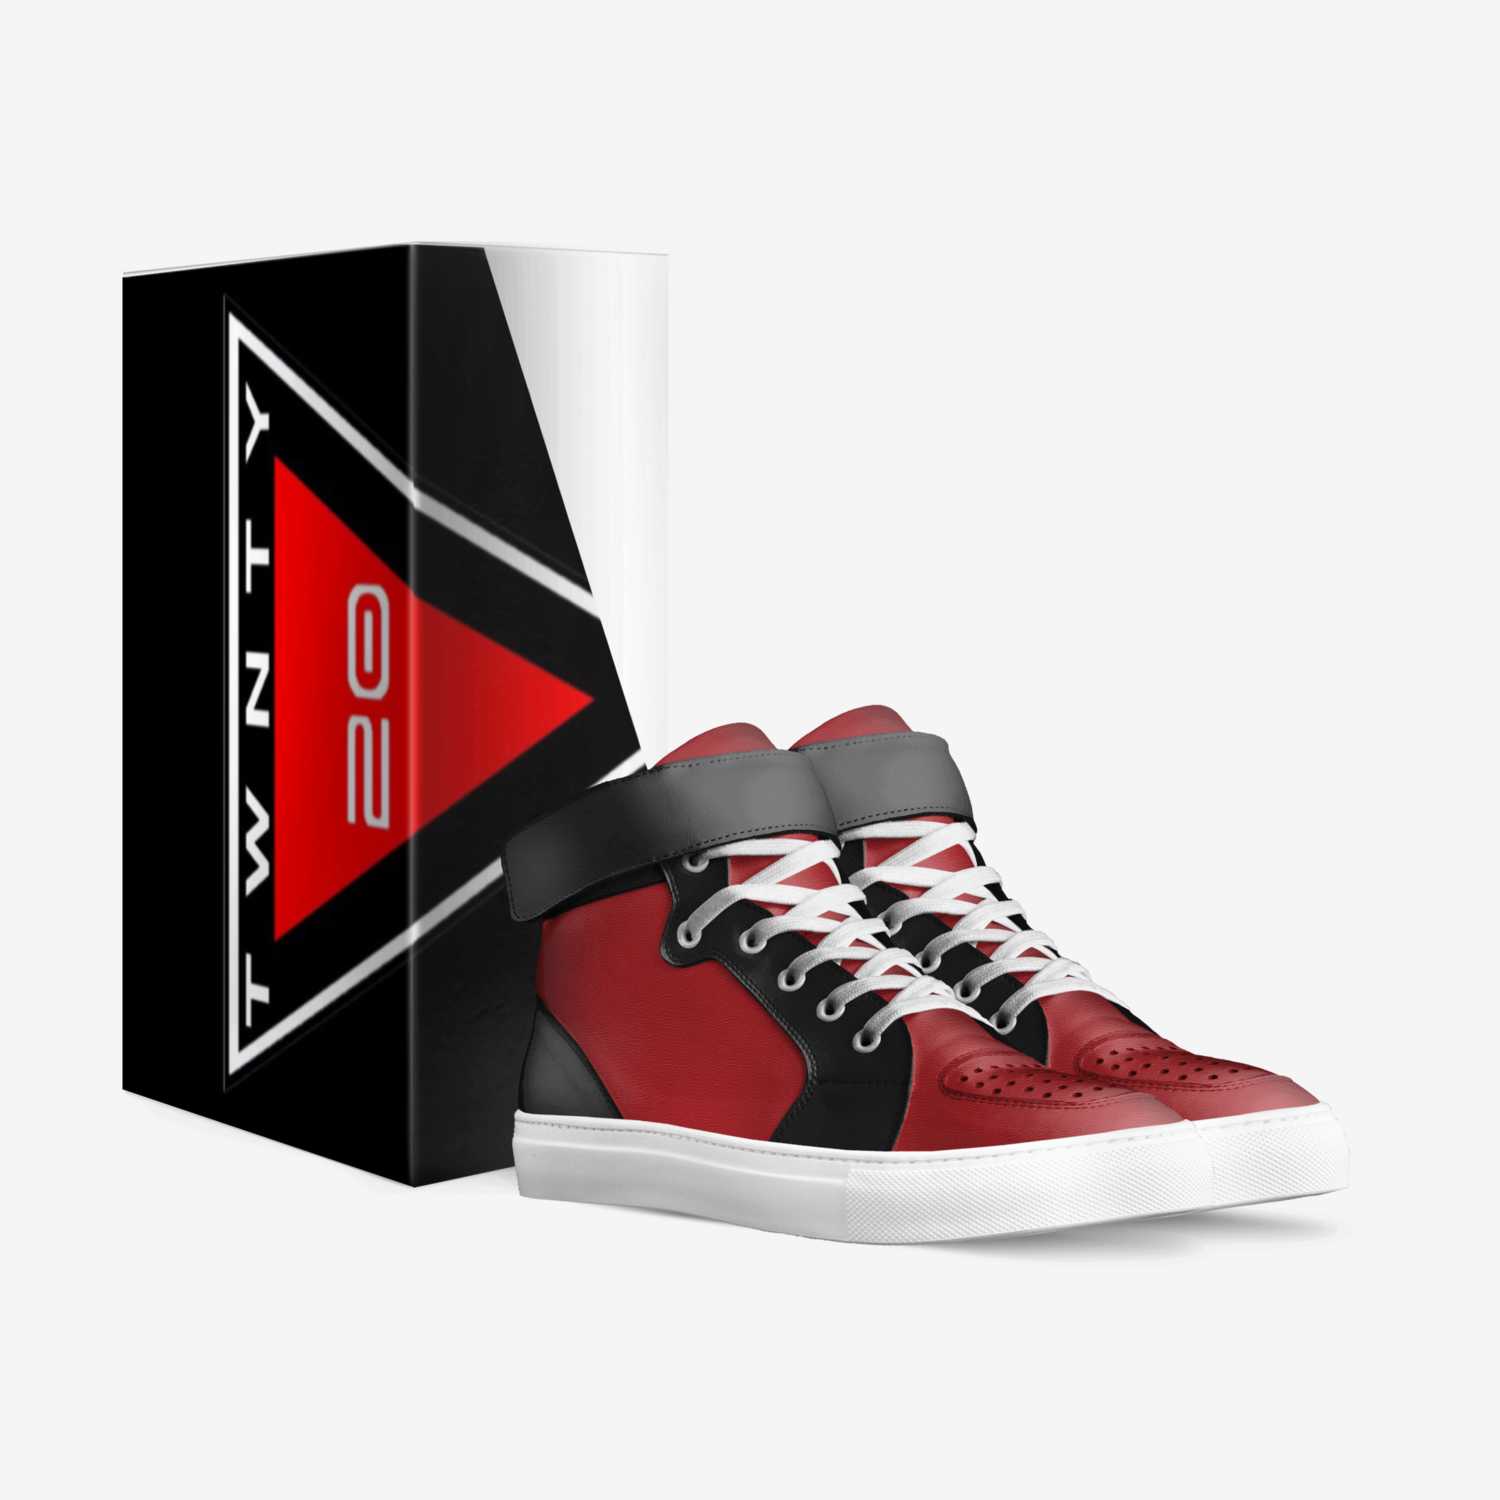 Lxr custom made in Italy shoes by Kvn Elvn | Box view